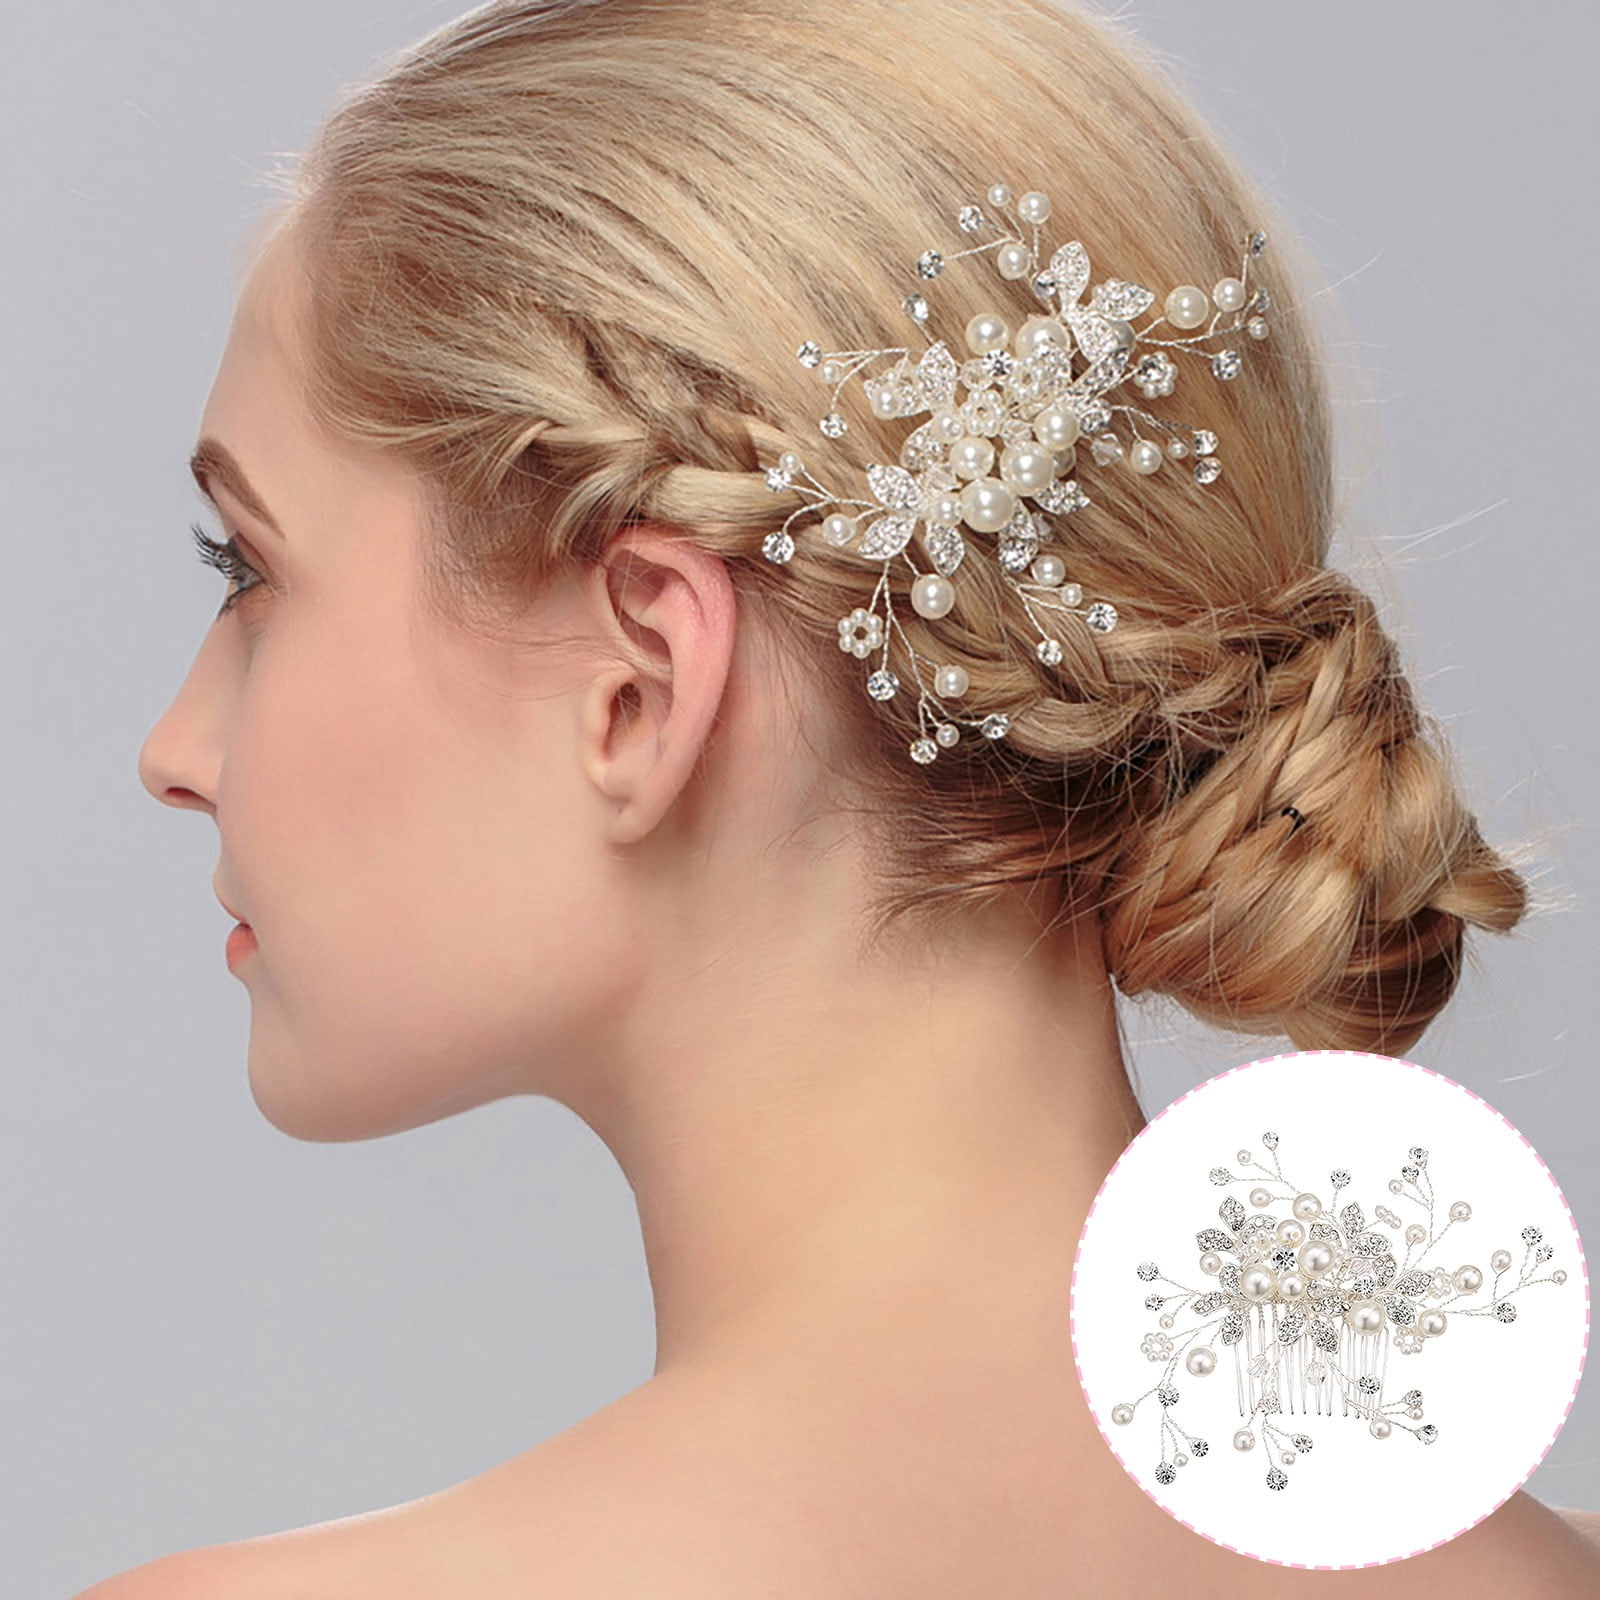 Buy Kiplyki Wholesale Bridal Wedding Crystal Alloy Hair Accessories Hair  Comb Pearl Pin Coil Hair Iron Online at Lowest Price in Ubuy Mozambique.  247128648